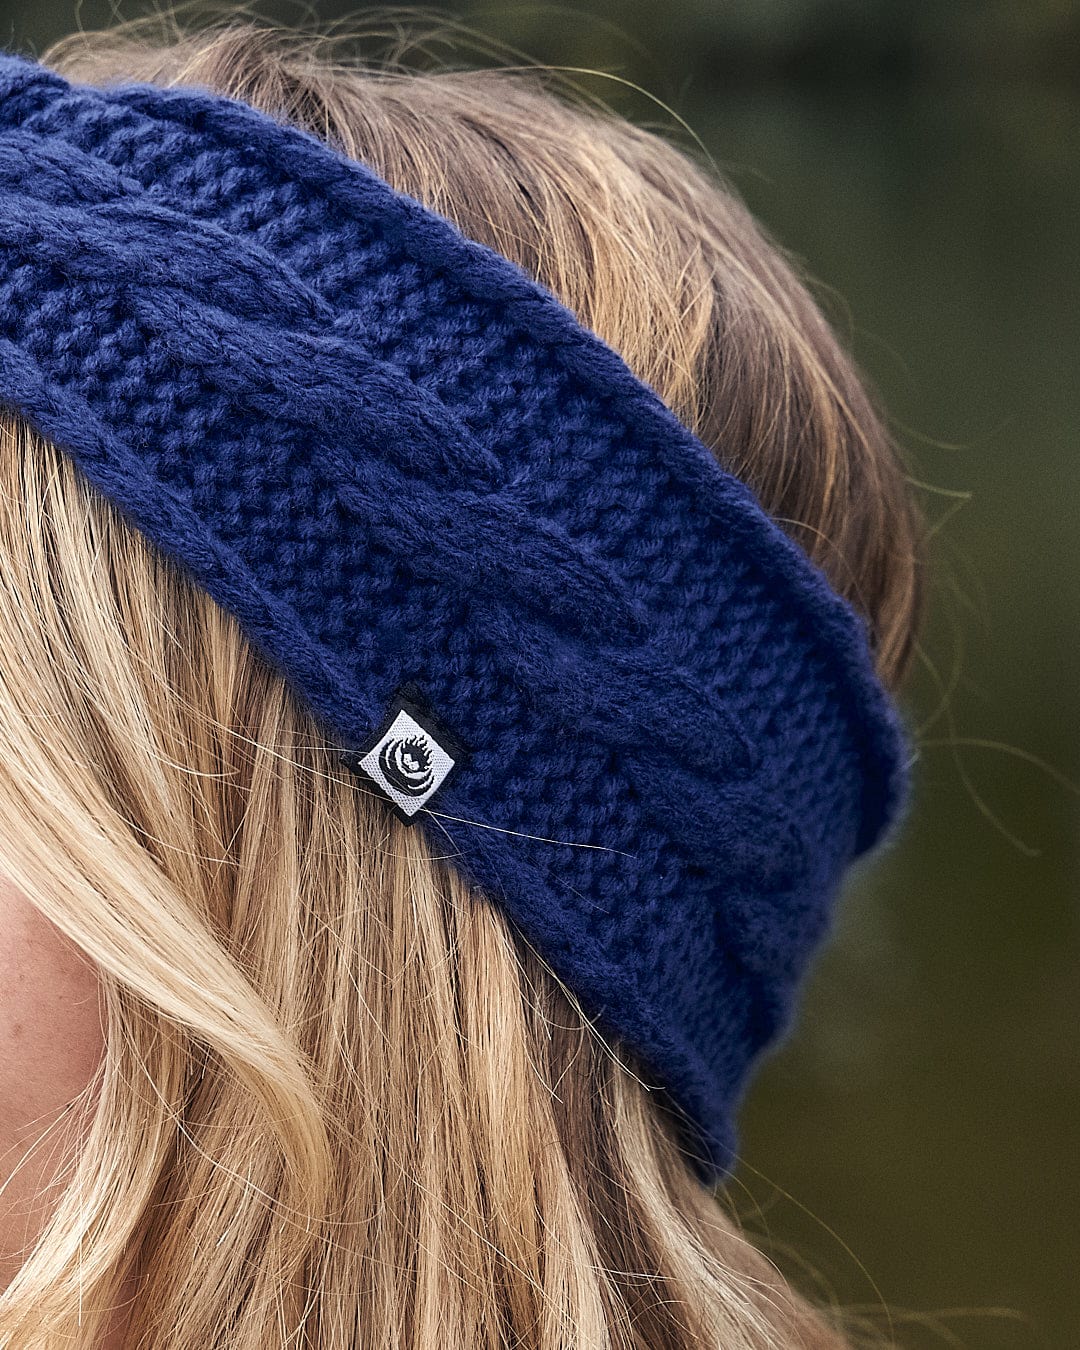 A fashionable woman wearing a Saltrock Cable - Knitted Headband - Blue for warmth.